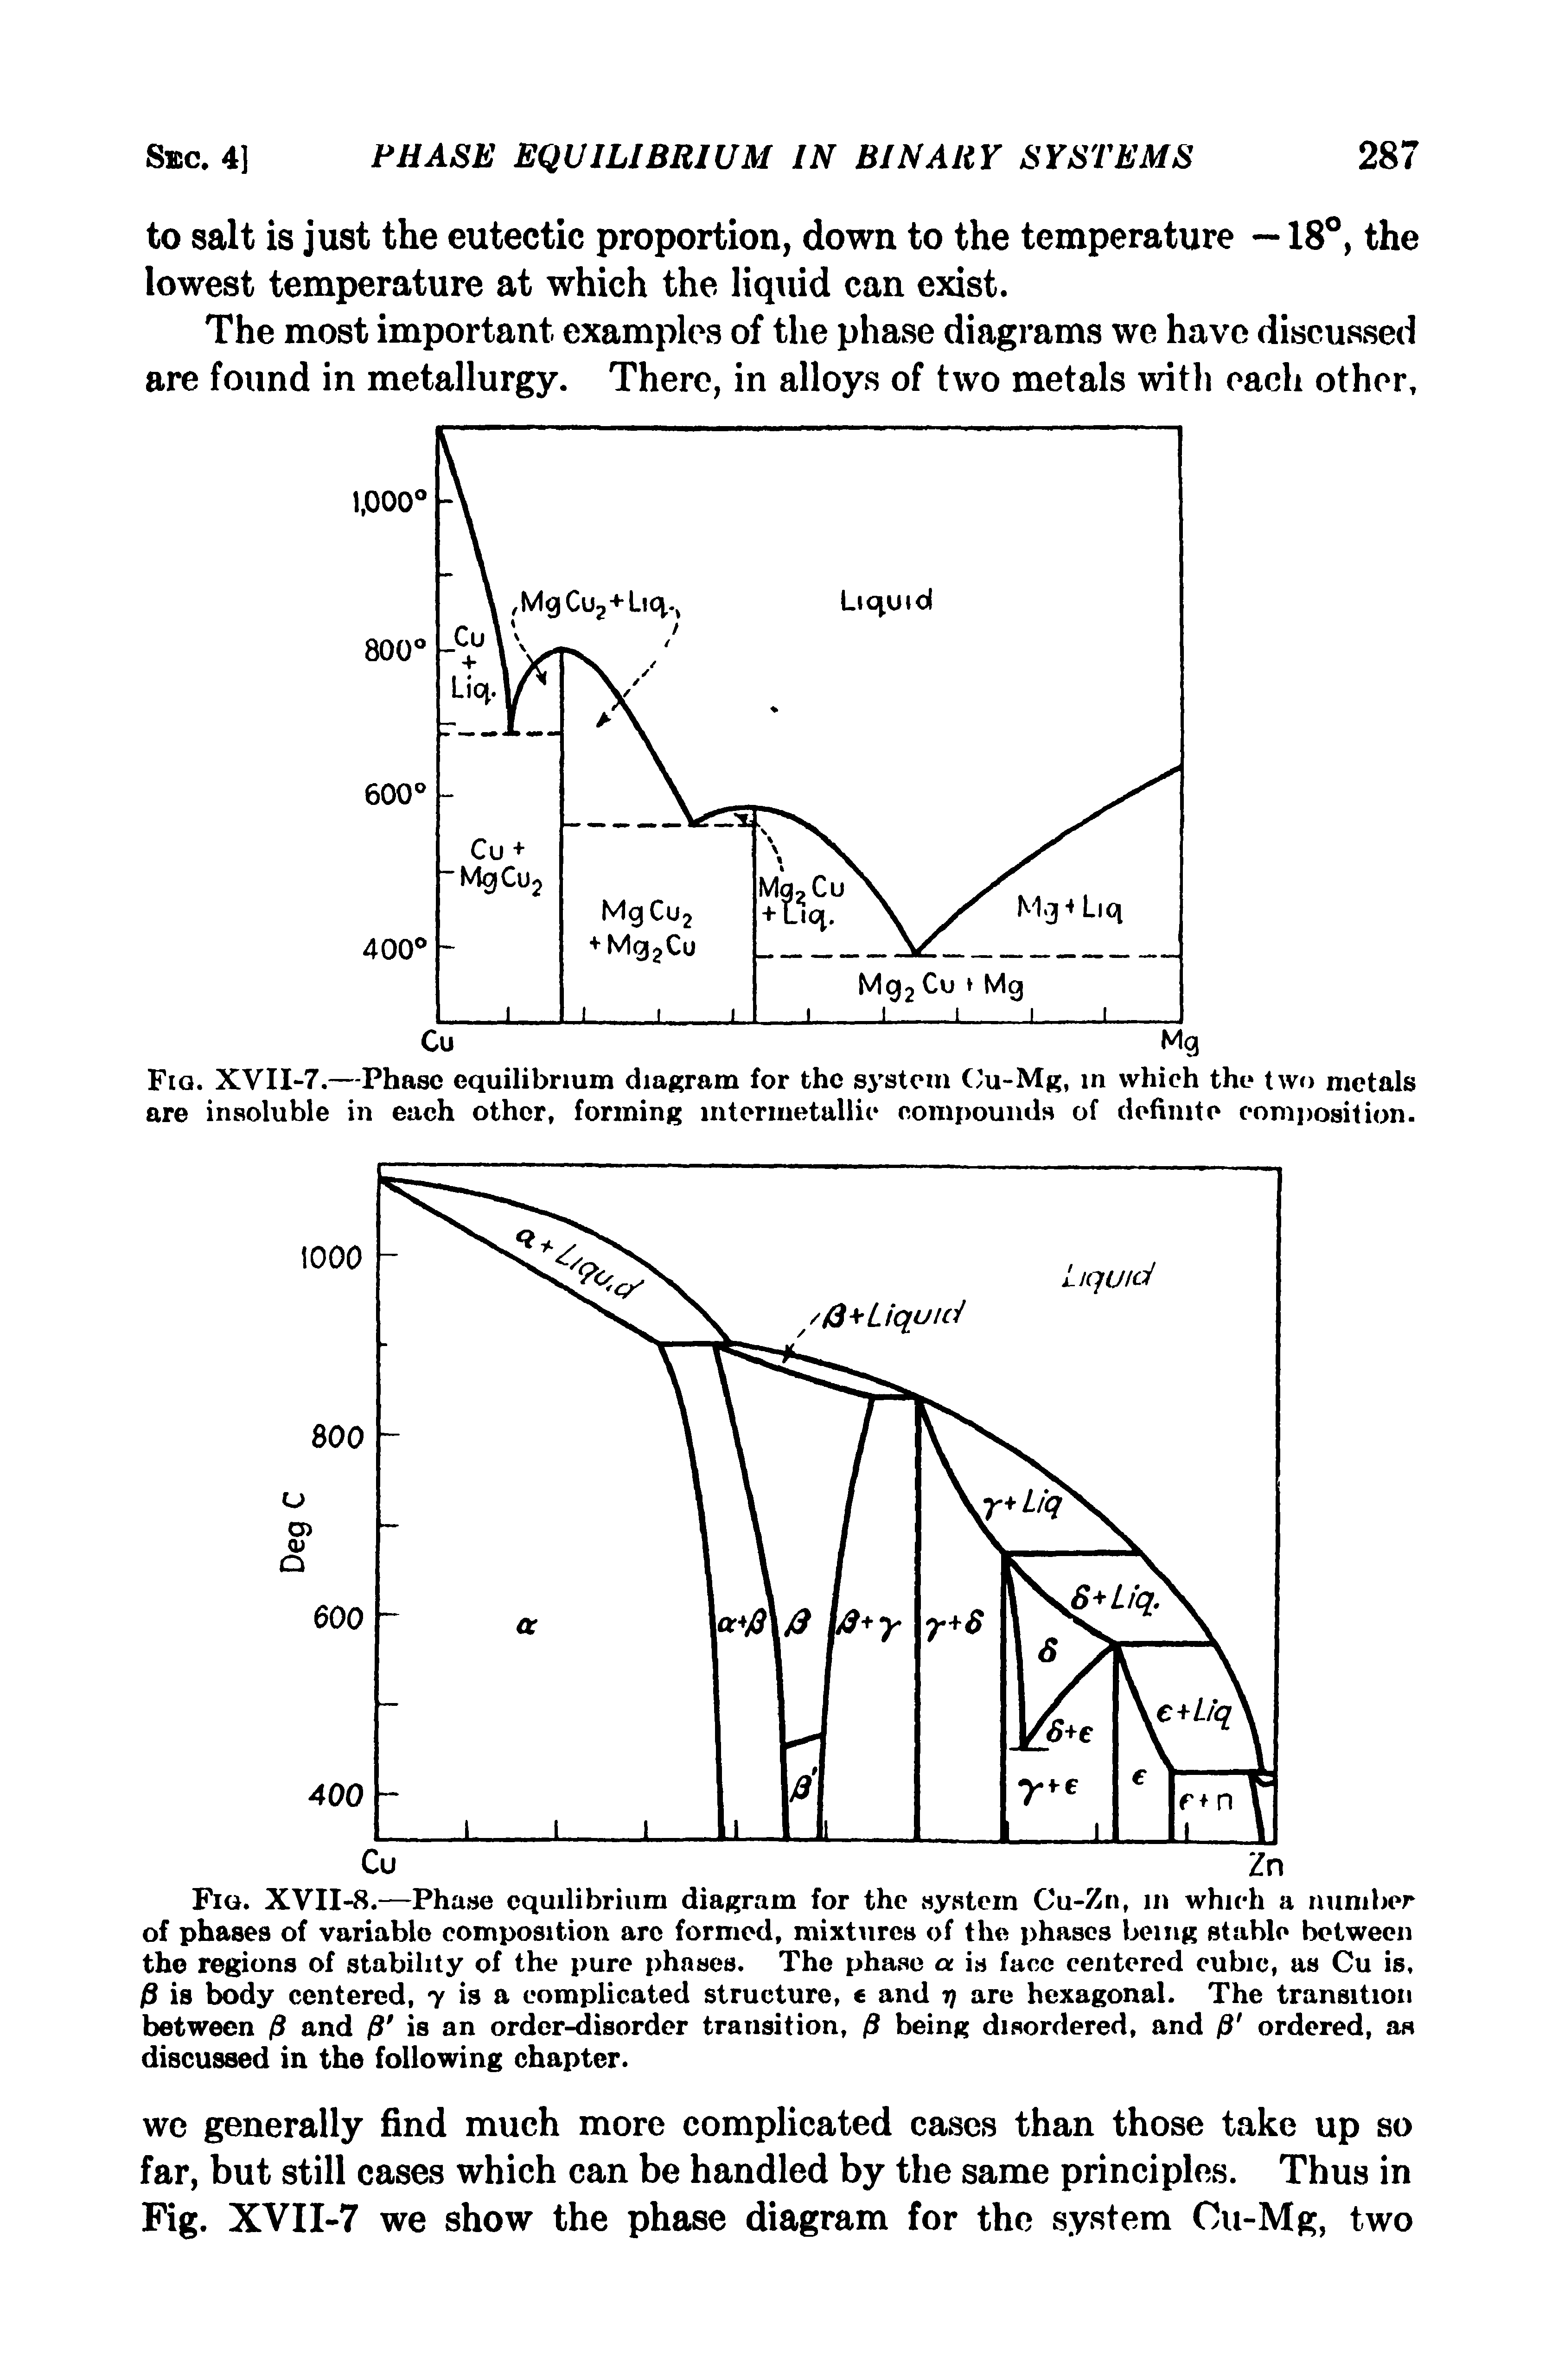 Fig. XVII-8.—Phase equilibrium diagram for the system Cu-Zn, in which a number of phases of variable composition arc formed, mixtures of the phases being stable between the regions of stability of the pure phases. The phase a is face centered cubic, as Cu is, j8 is body centered, 7 is a complicated structure, e and r) are hexagonal. The transition between and /S is an order-disorder transition, /3 being disordered, and /8 ordered, as discussed in the following chapter.